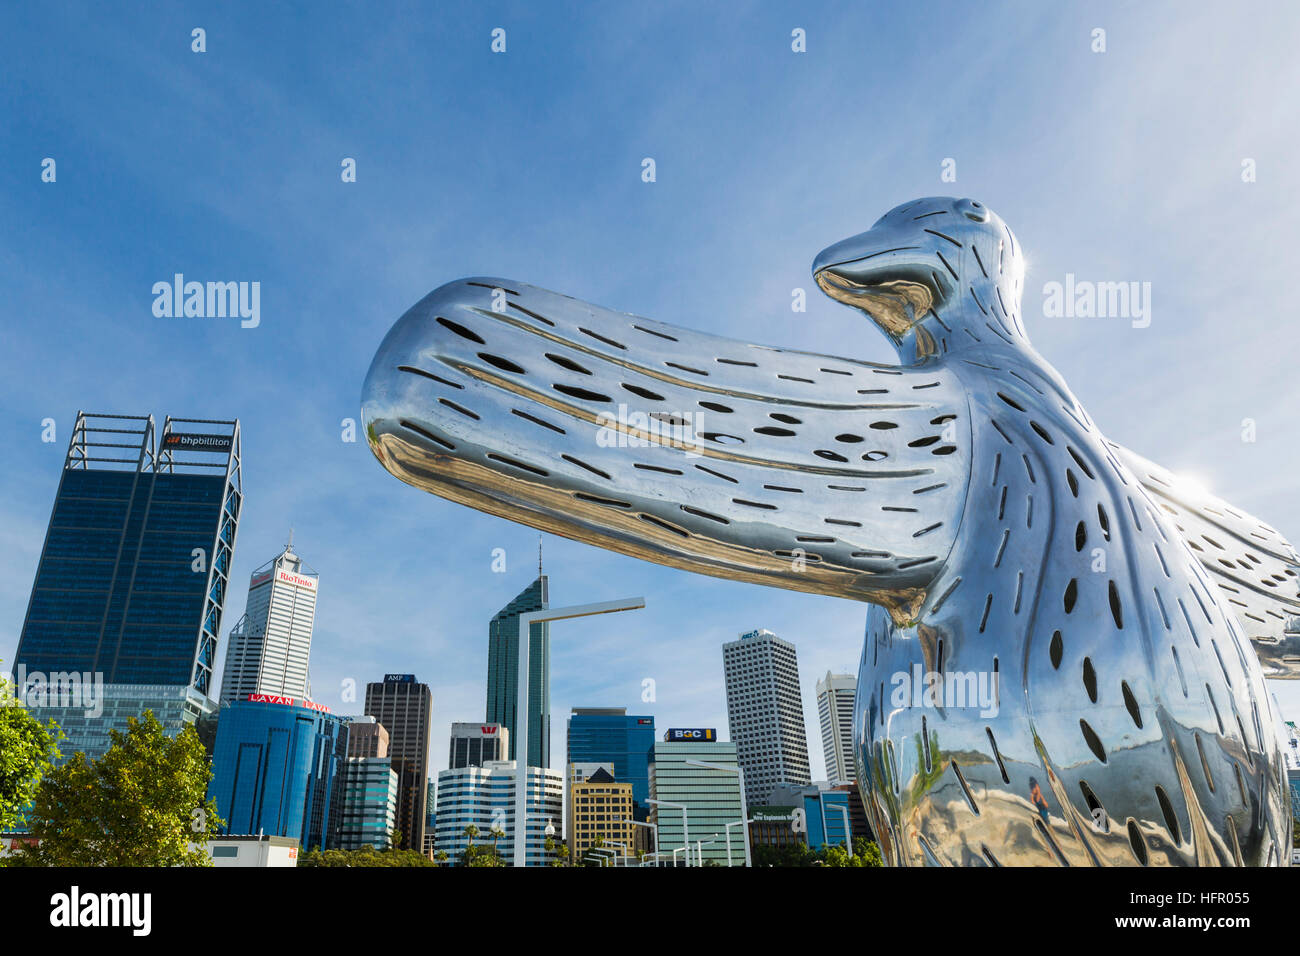 The First Contact sculpture on the Swan River waterfront at Elizabeth Quay & city skyline.  Perth, Western Australia, Australia Stock Photo